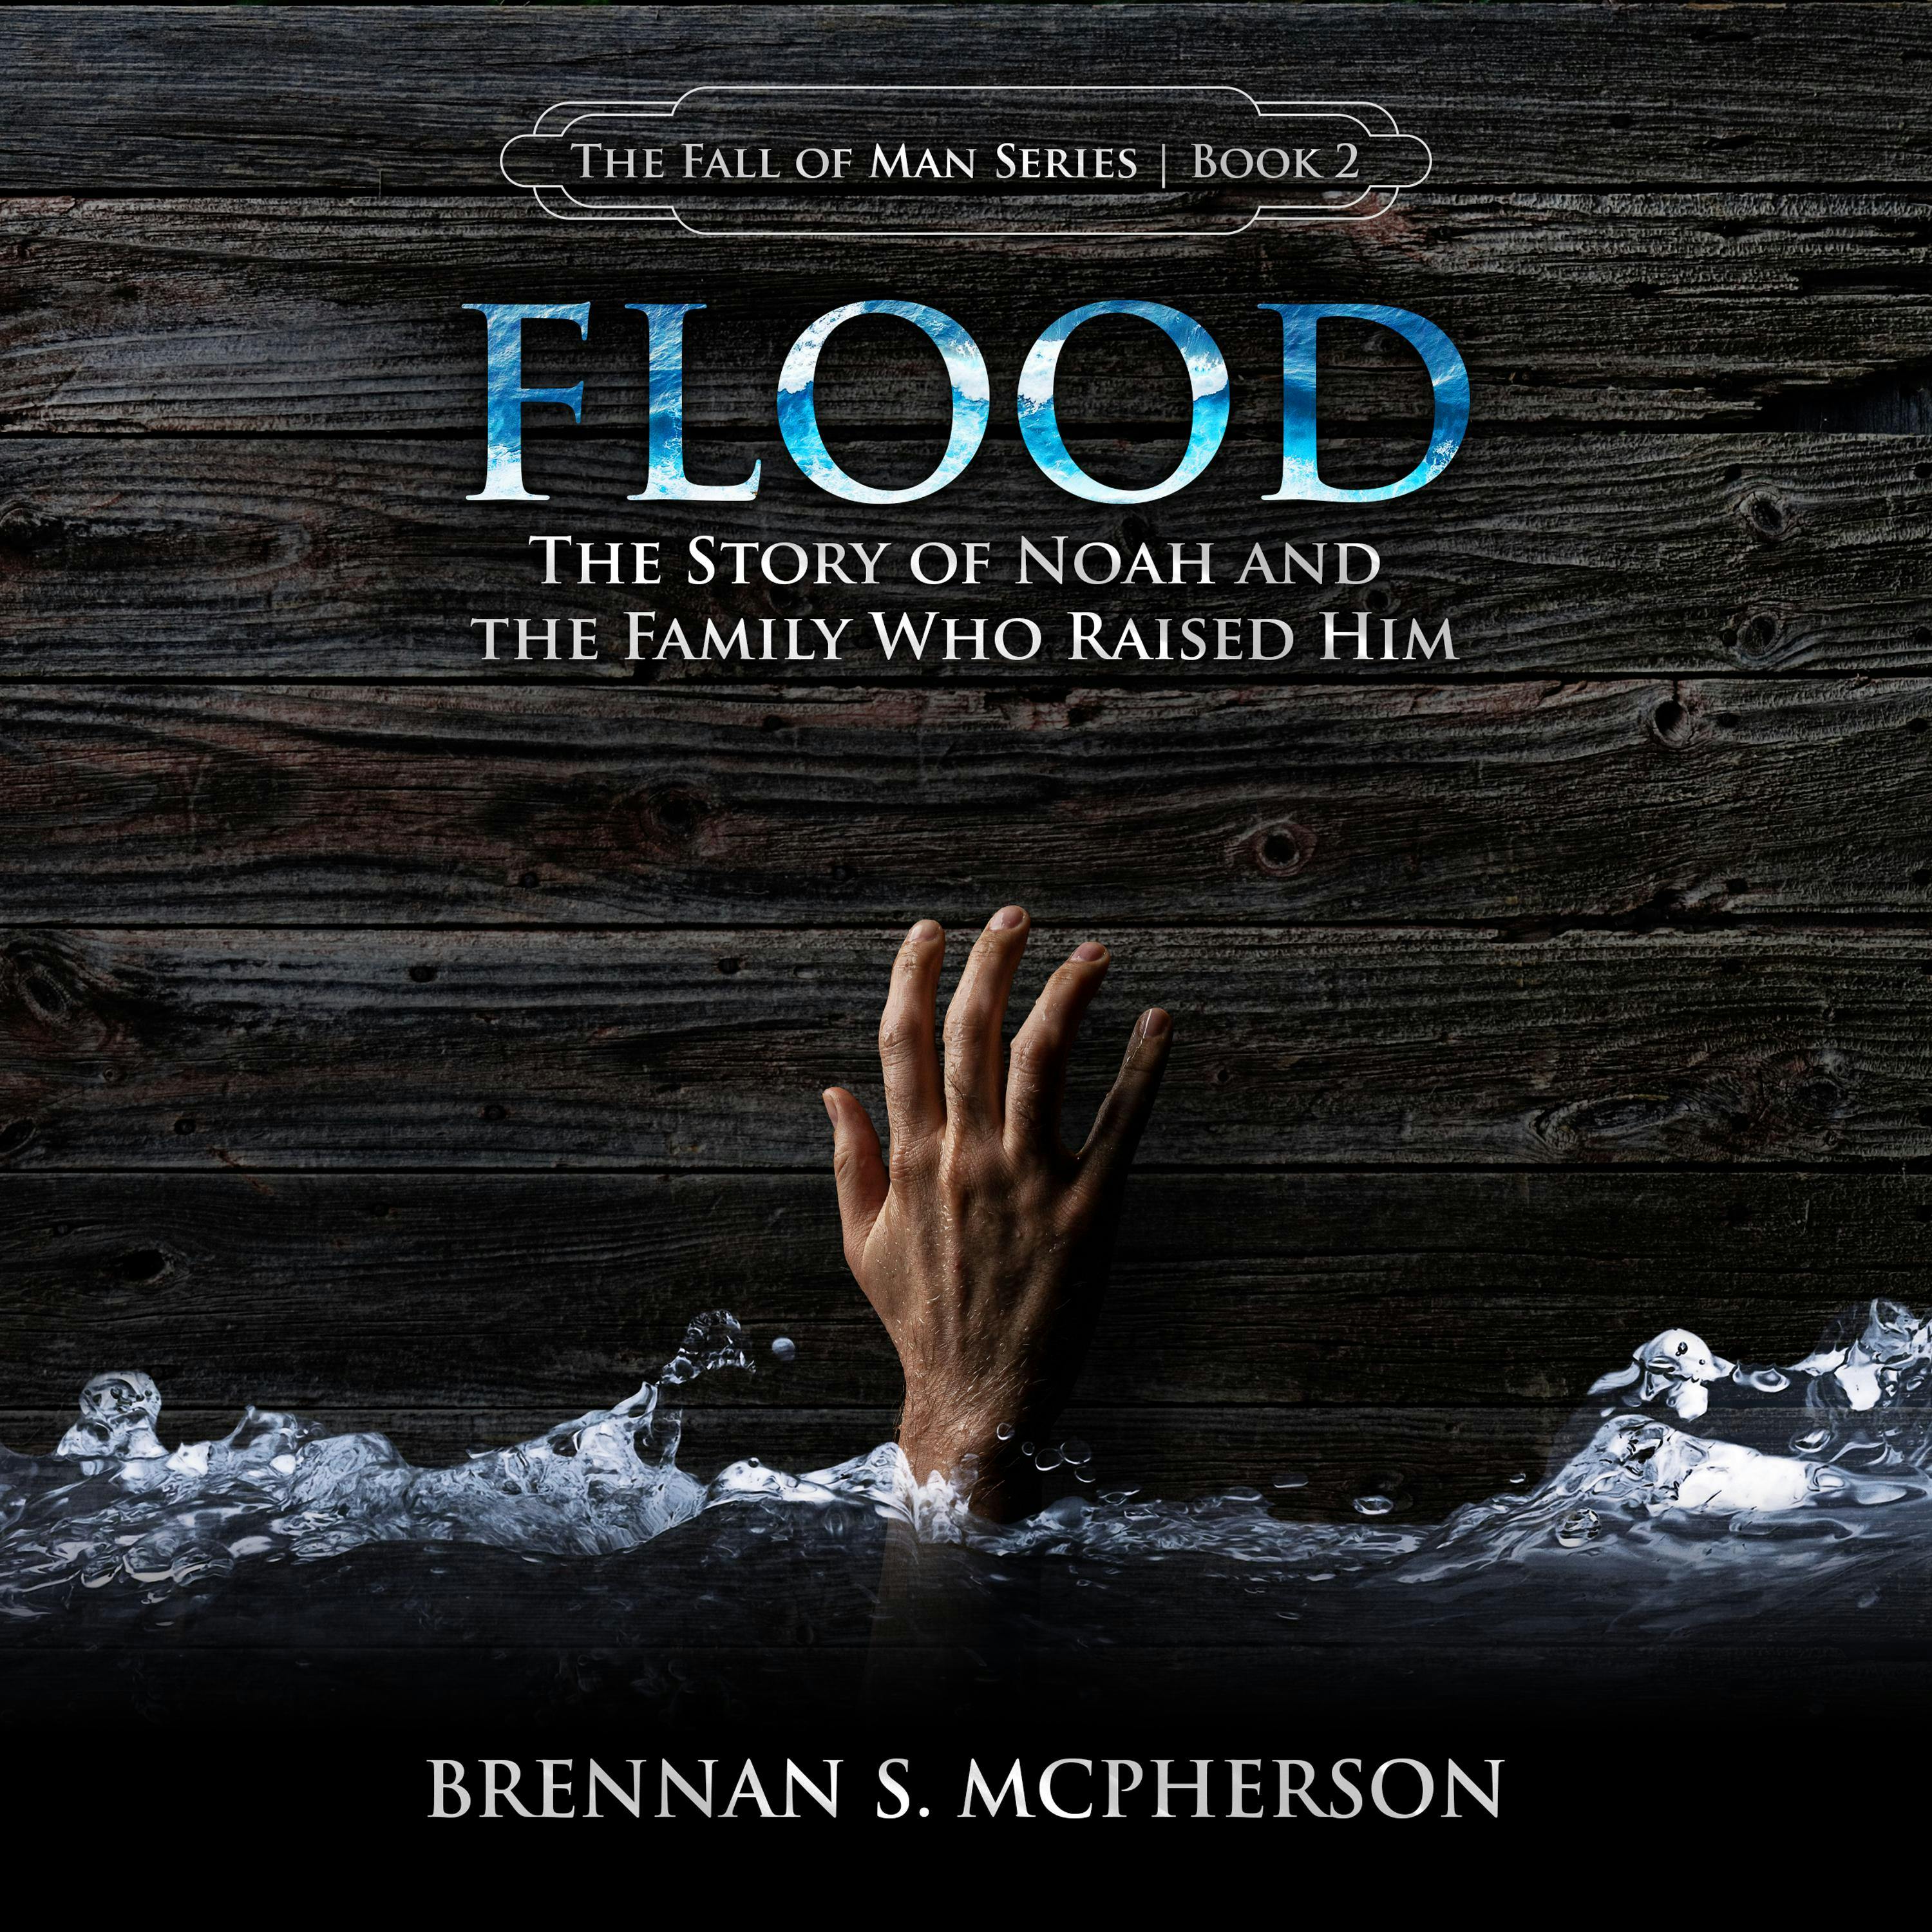 Flood: The Story of Noah and the Family Who Raised Him - Brennan S. McPherson